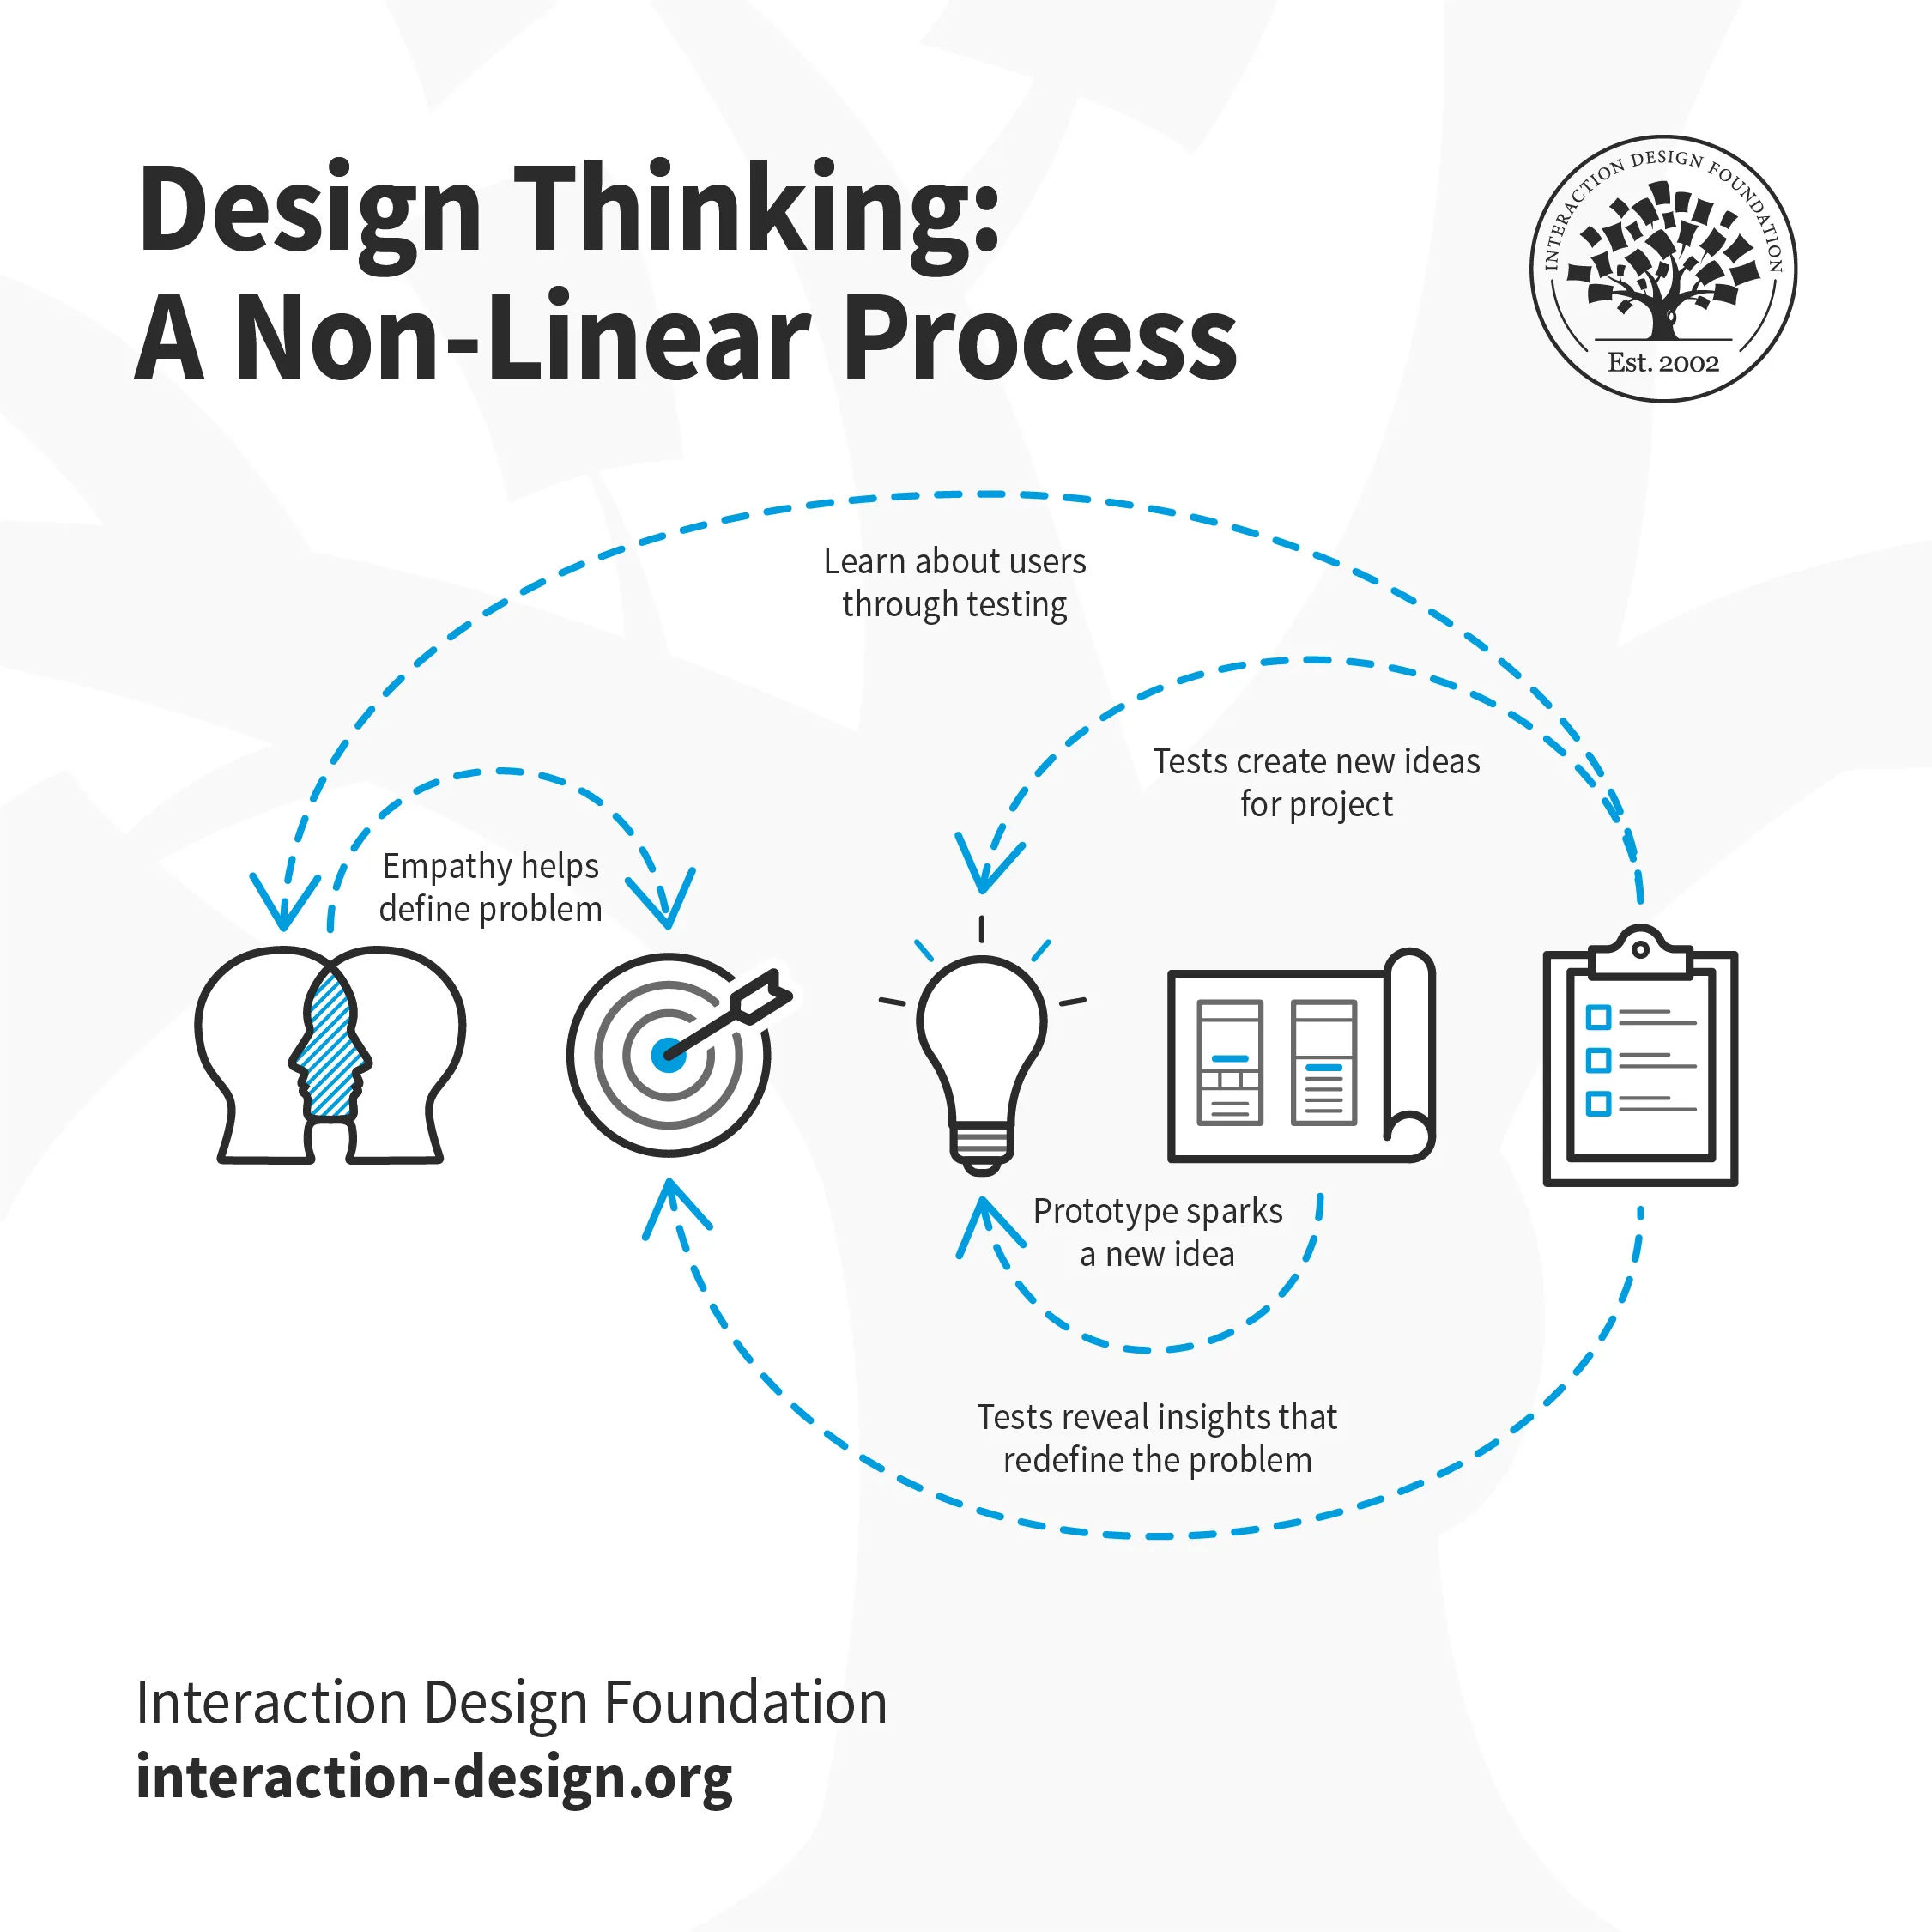 Design Thinking: A Non-Linear process. Empathy helps define problem, Prototype sparks a new idea, tests reveal insights that redefine the problem, tests create new ideas for project, learn about users (empathize) through testing.